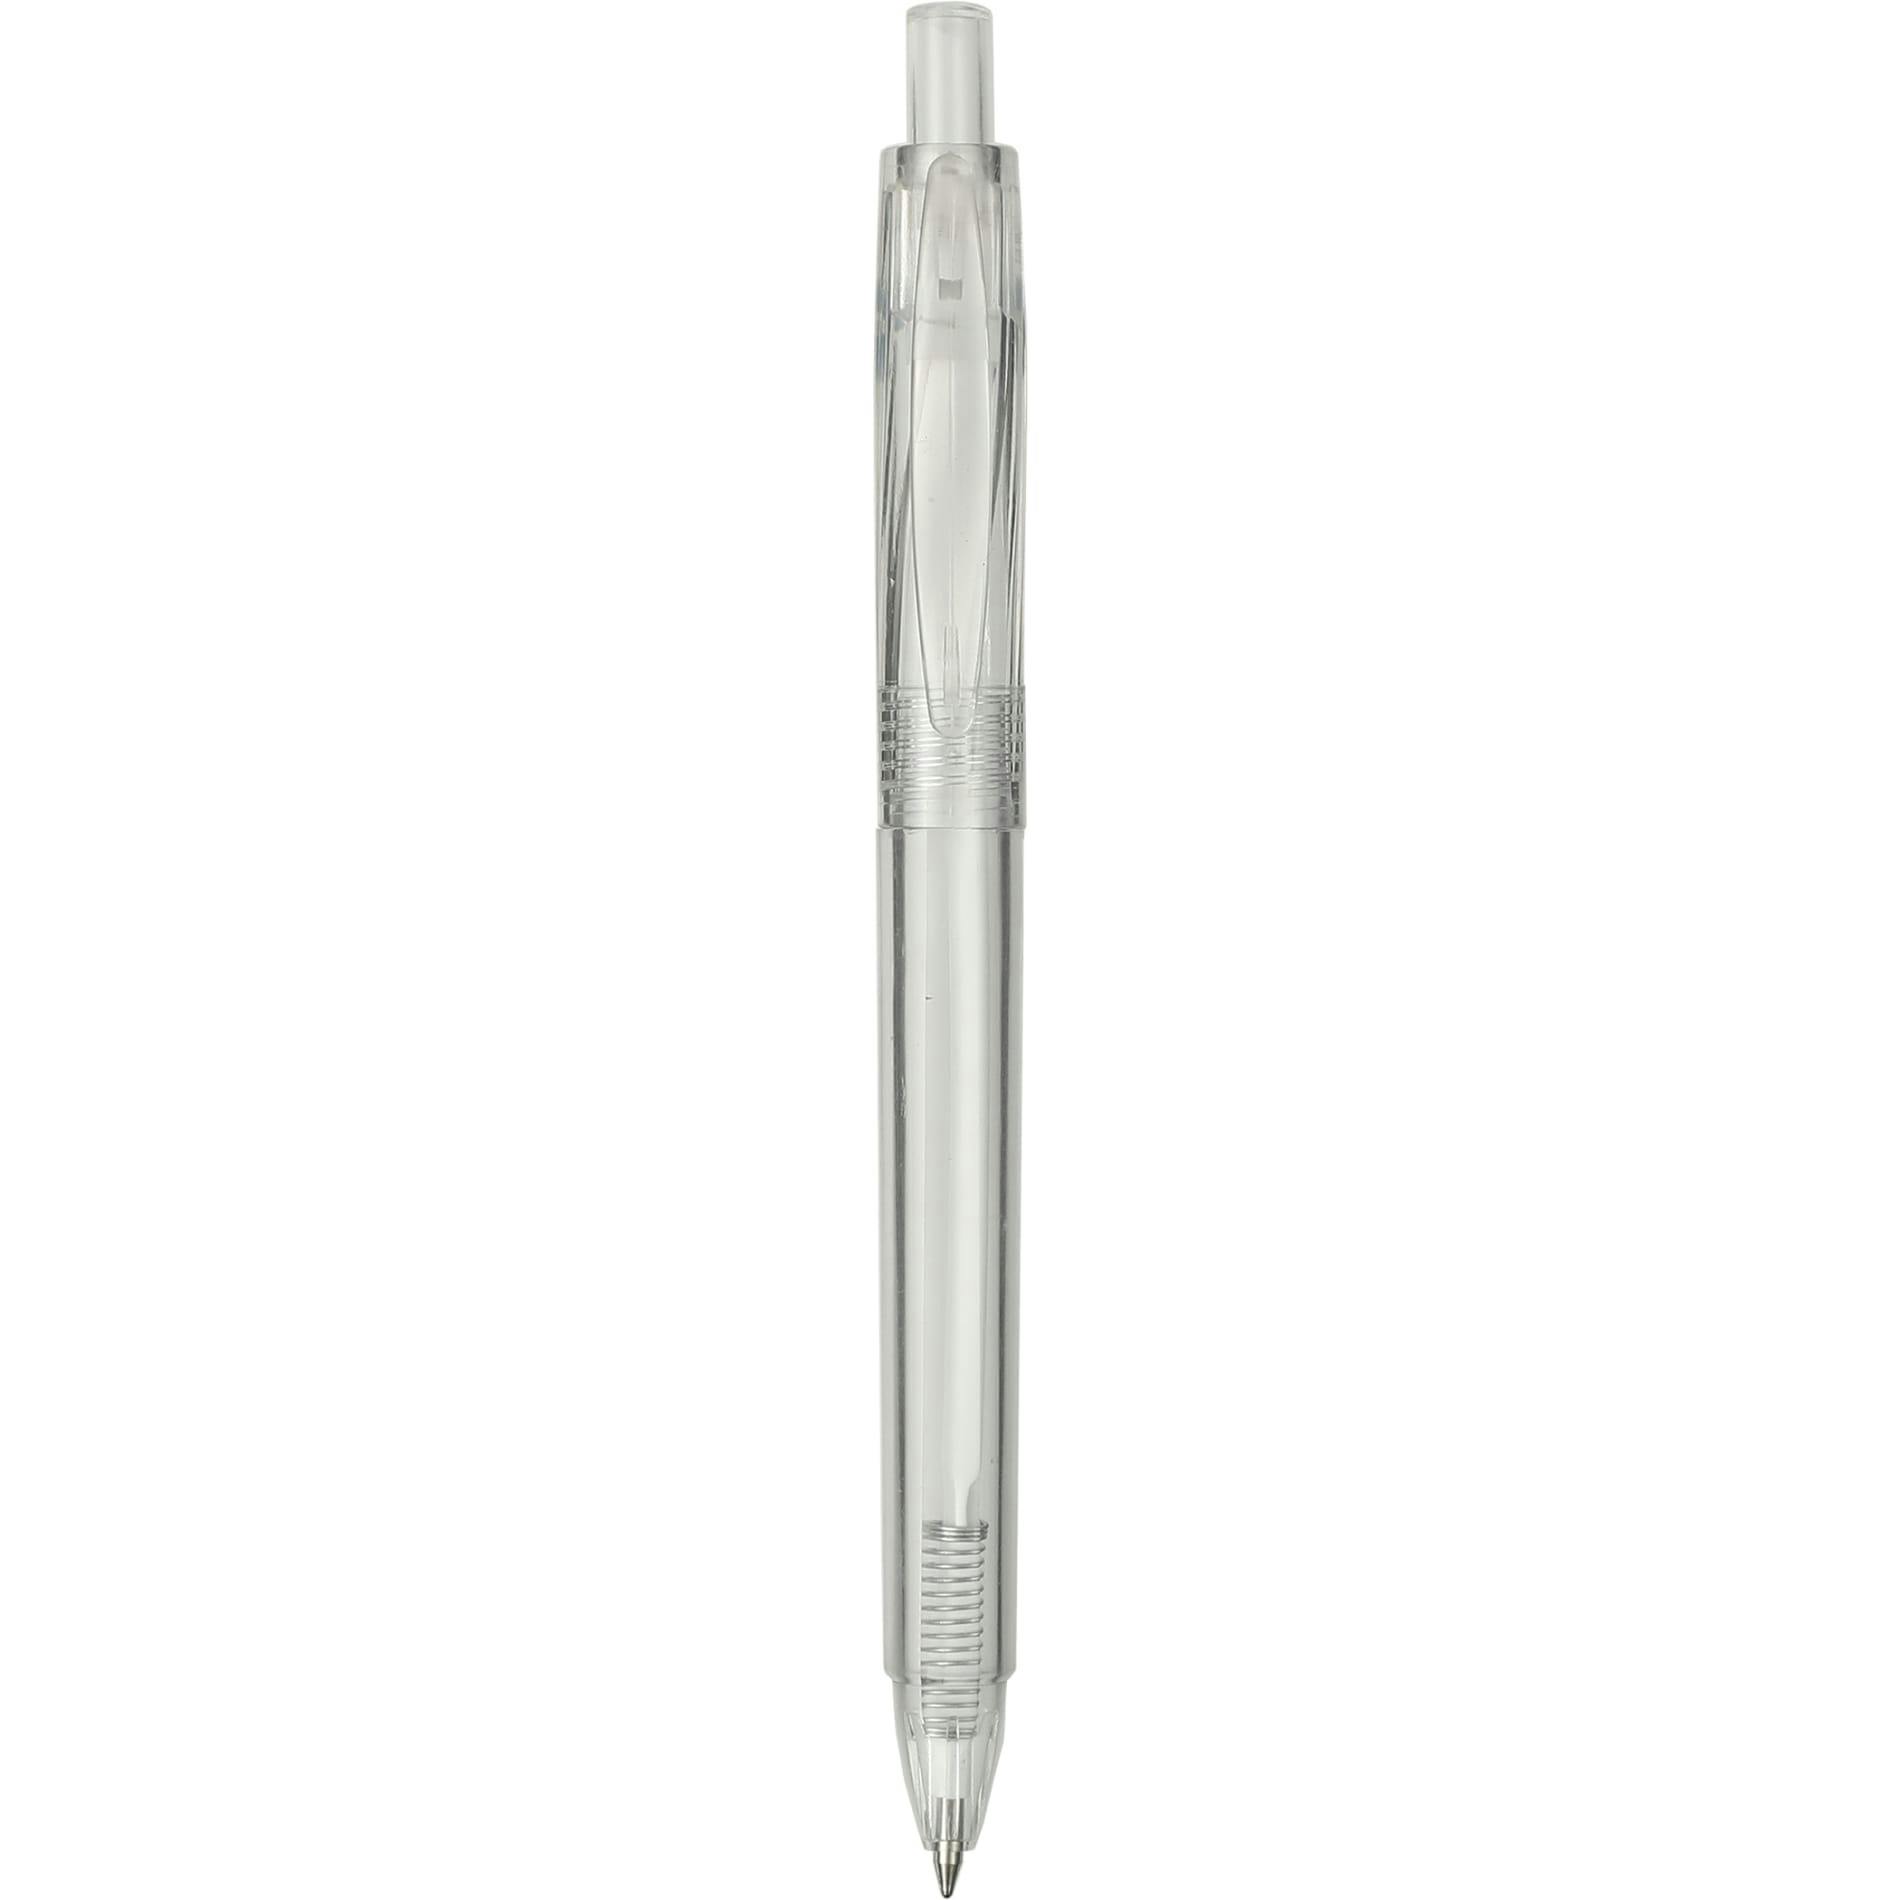 FUNCTION RPET Quick-Dry Gel Pen - additional Image 1